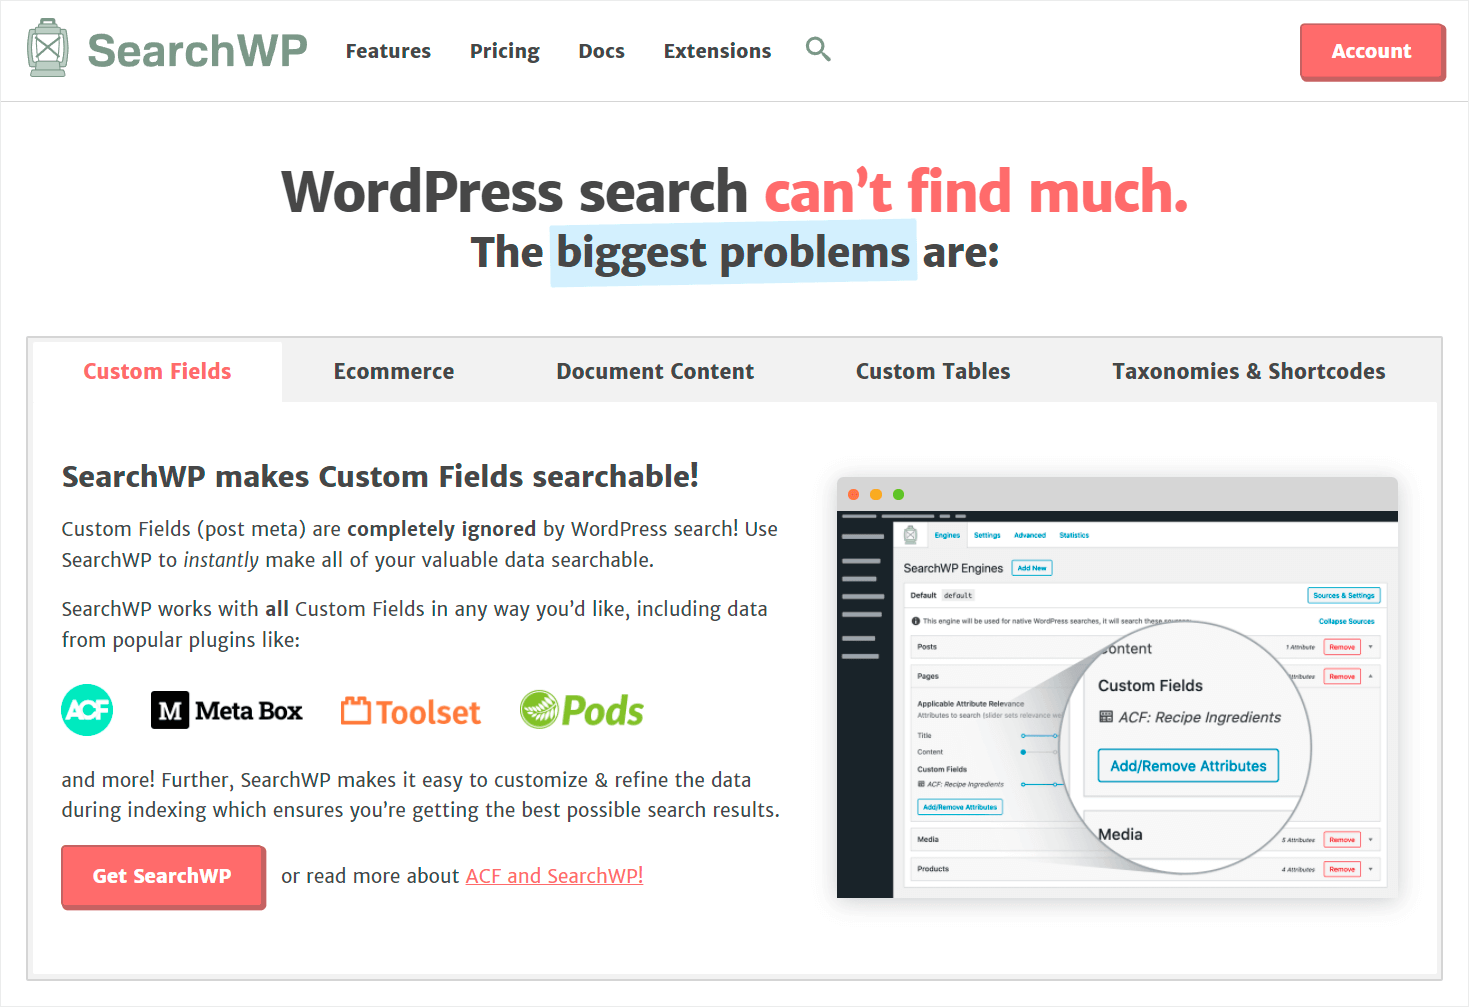 SearchWP vs Better Search which WordPress search tool is better